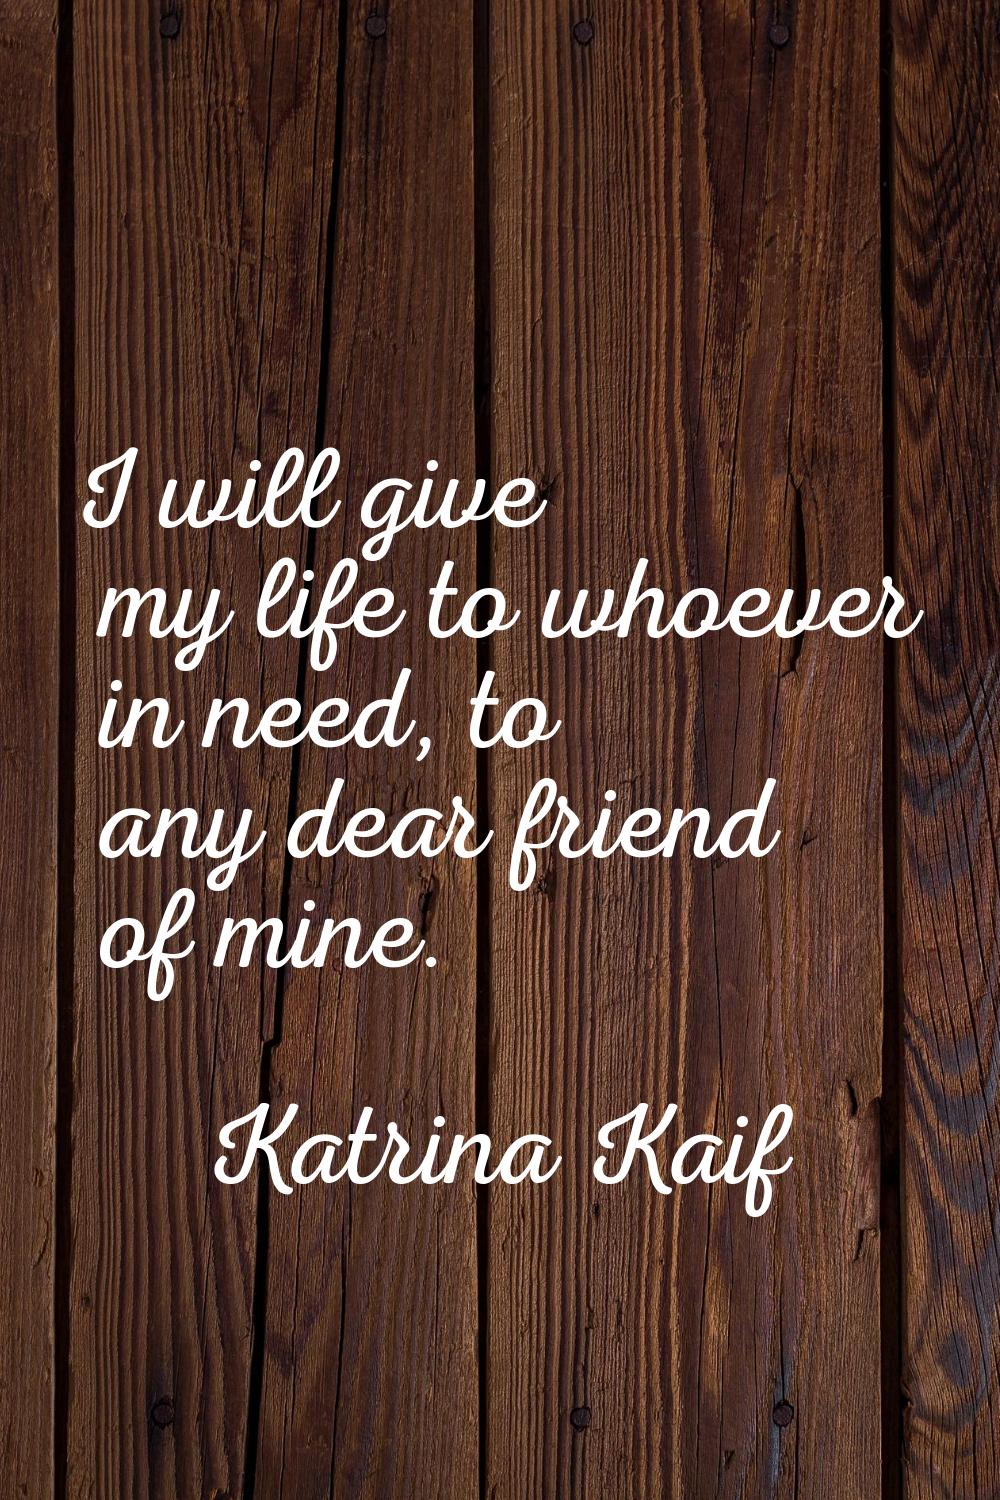 I will give my life to whoever in need, to any dear friend of mine.